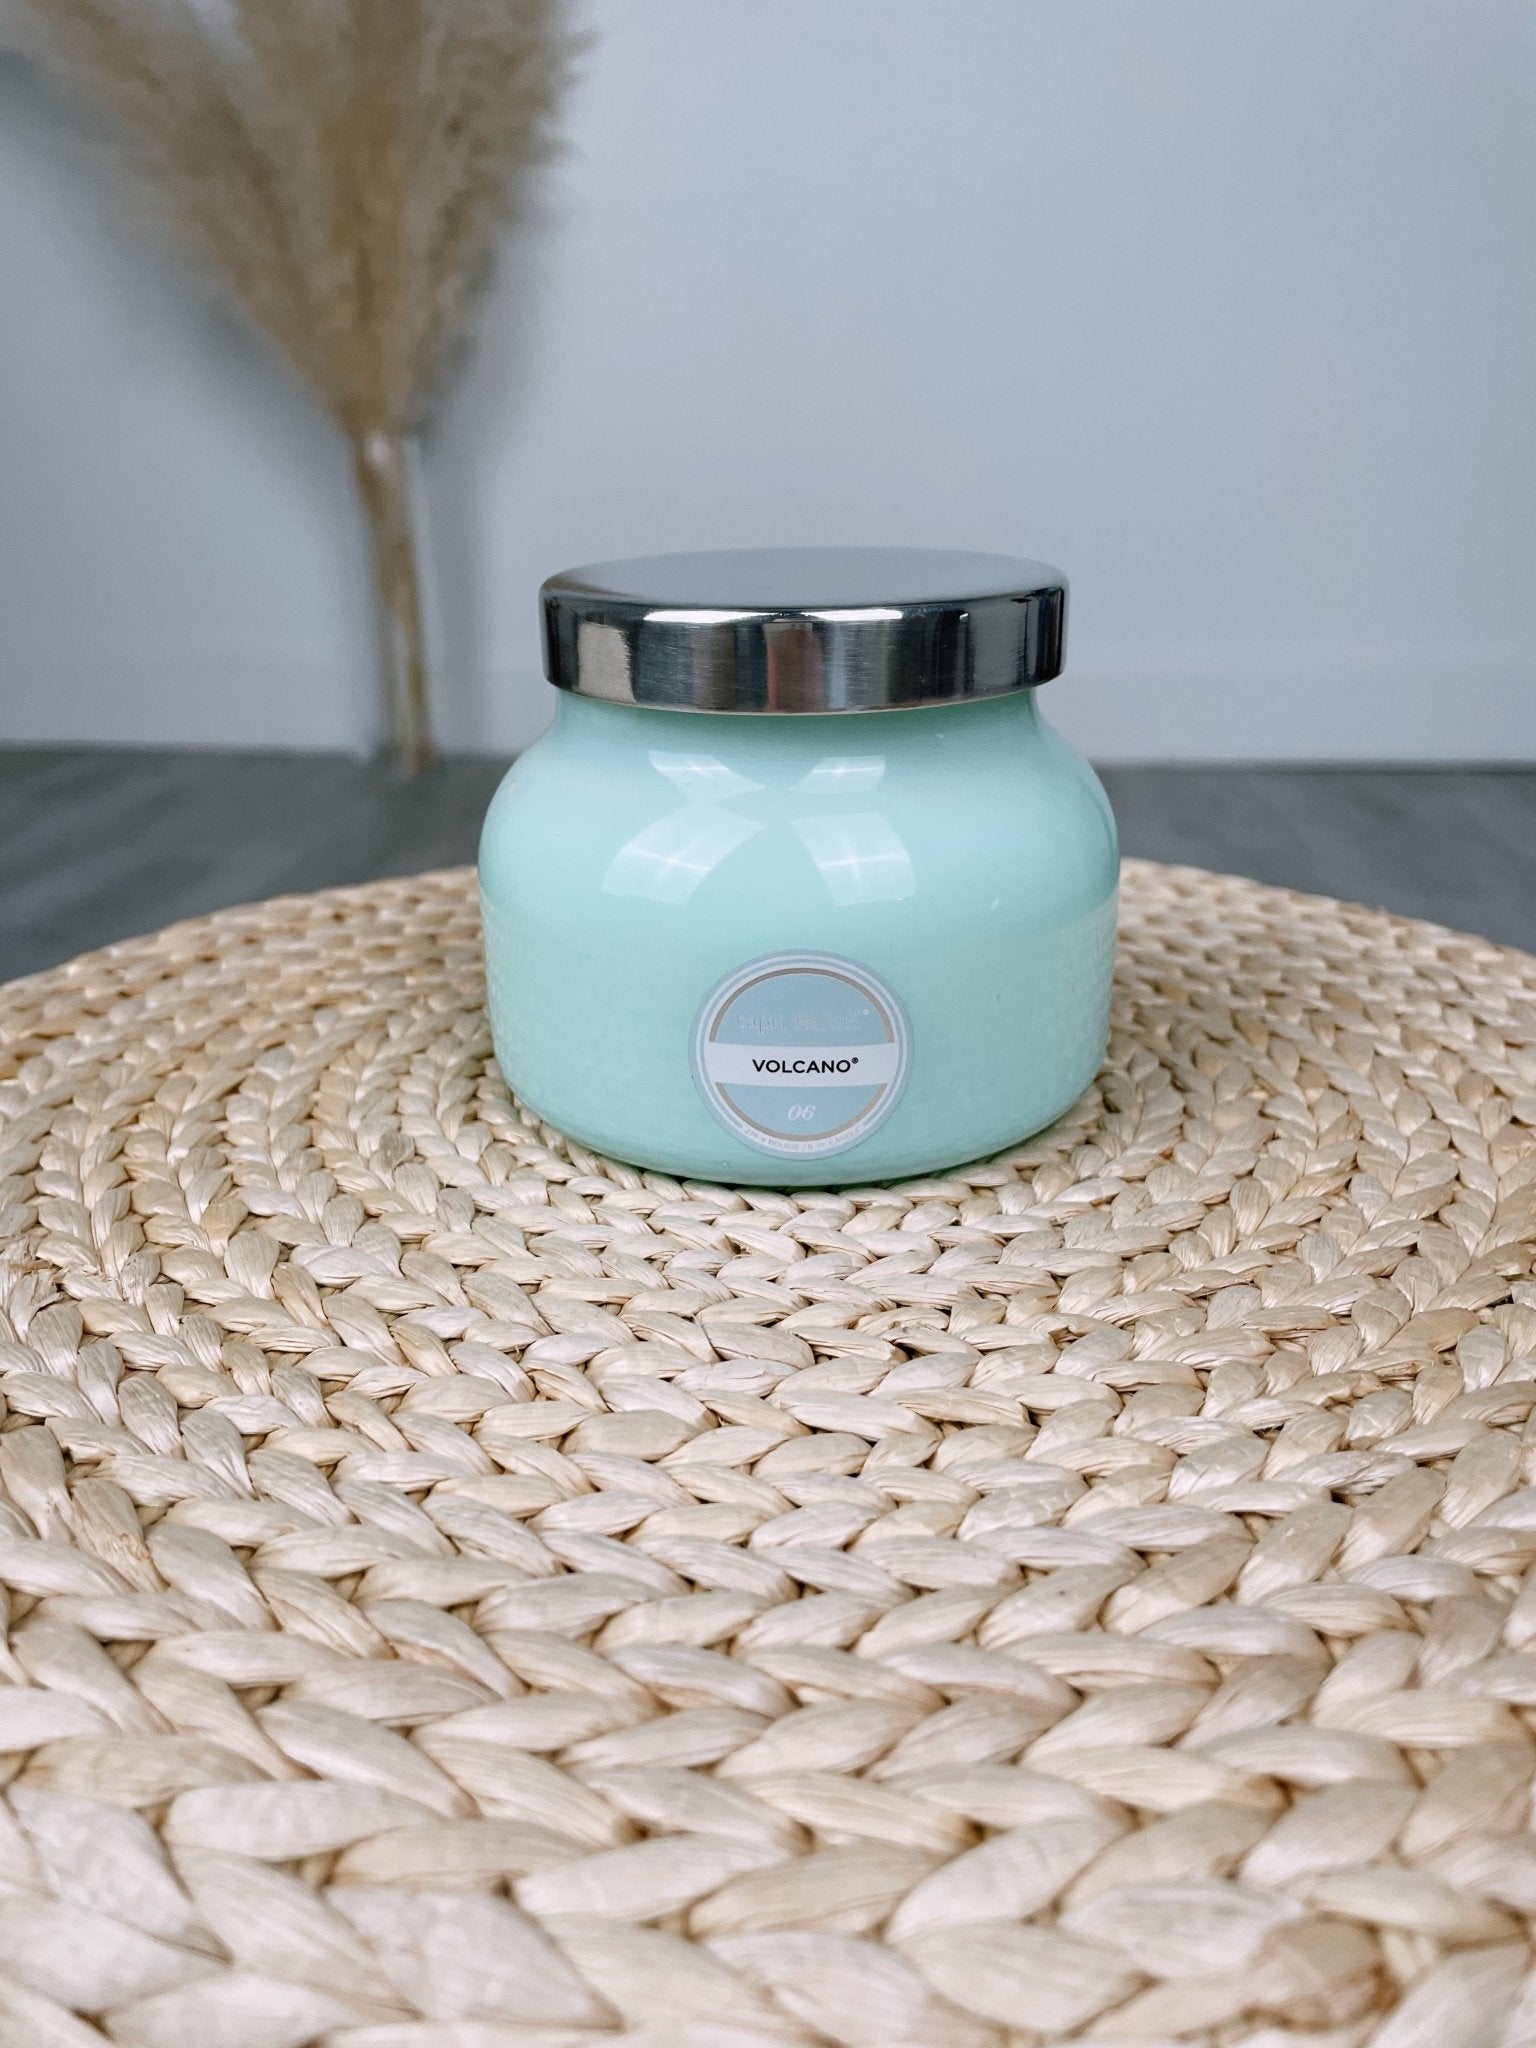 Capri Blue volcano 8 oz petite candle aqua - Trendy Candles and Scents at Lush Fashion Lounge Boutique in Oklahoma City